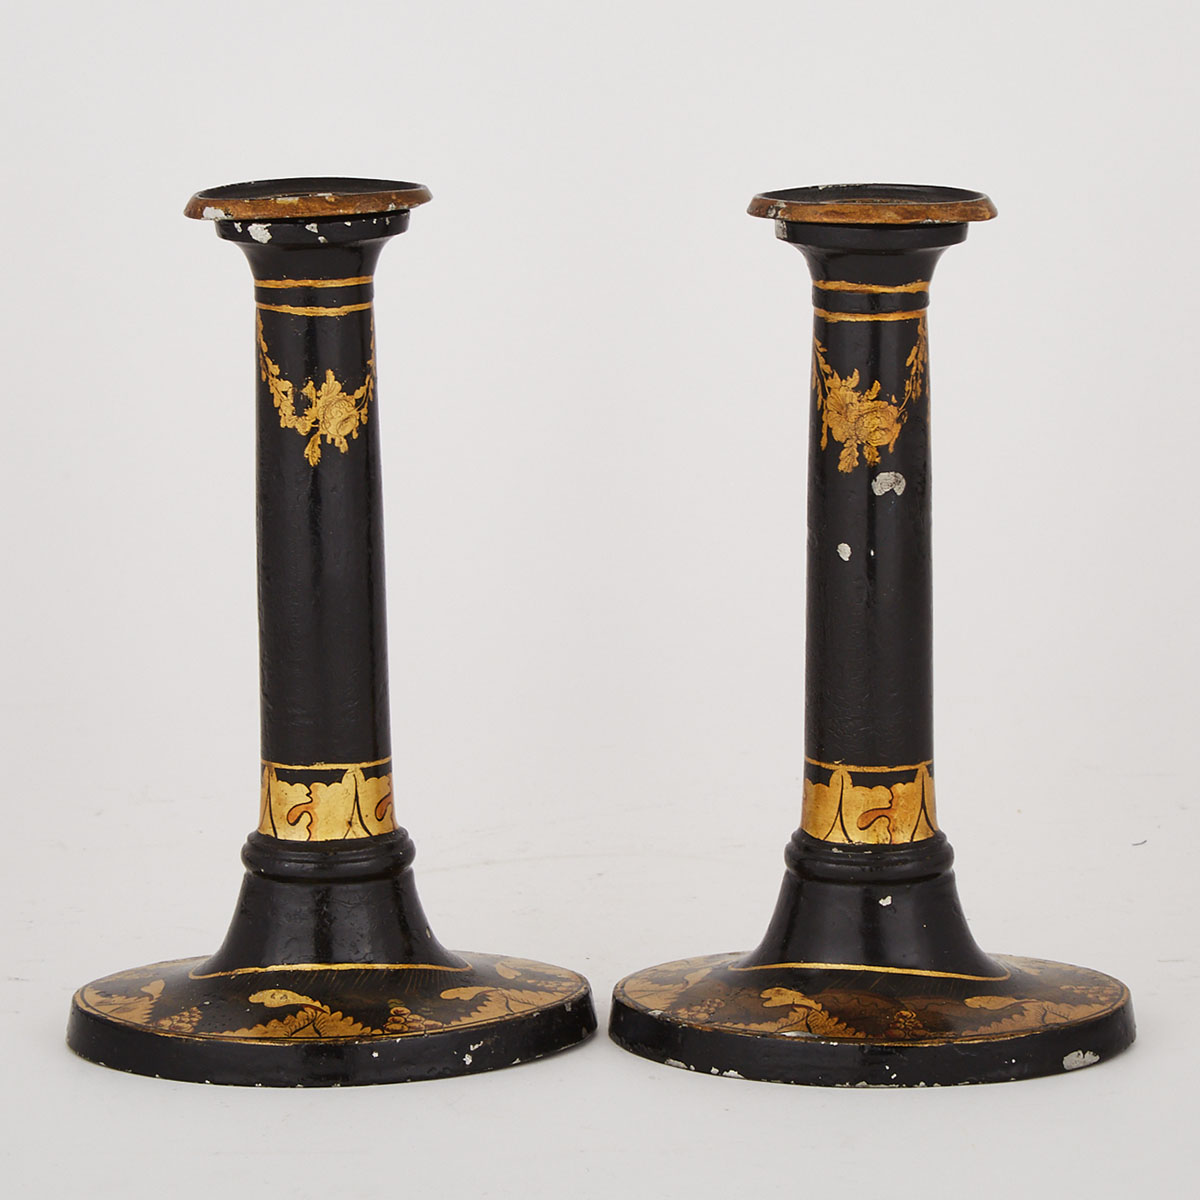 Pair of Victorian Black Lacquered and Gilt Decorated Zinc Candlesticks, mid 19th century